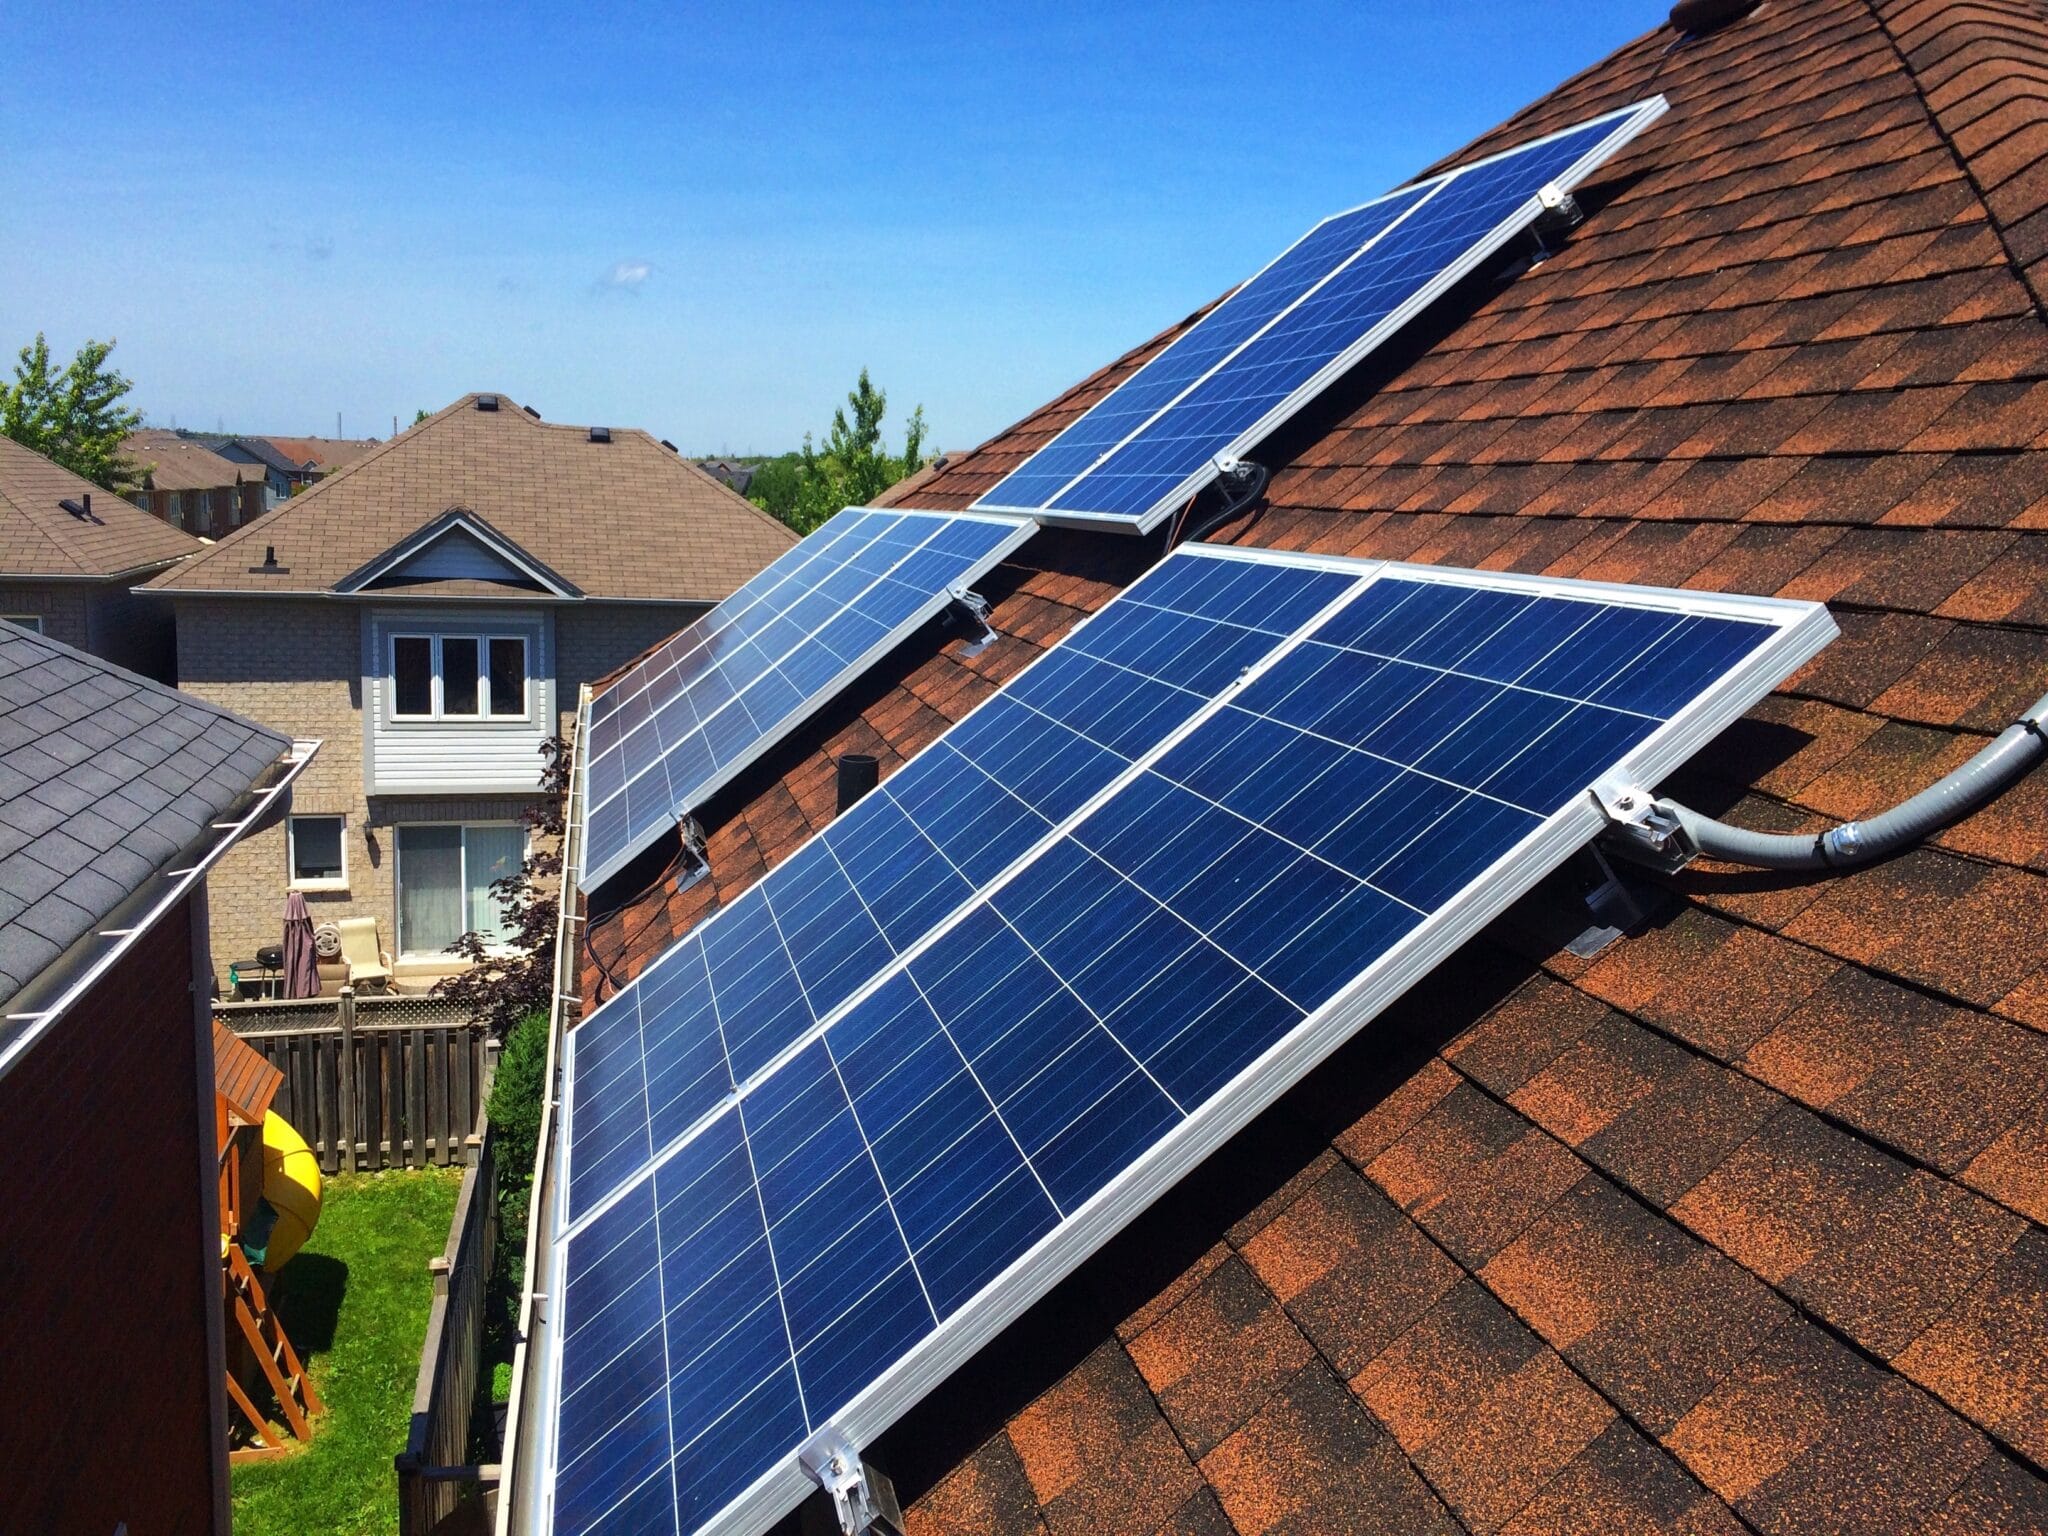 Expert Solar Panel Cleaning Services in Orange County, California - Solar Sparkle